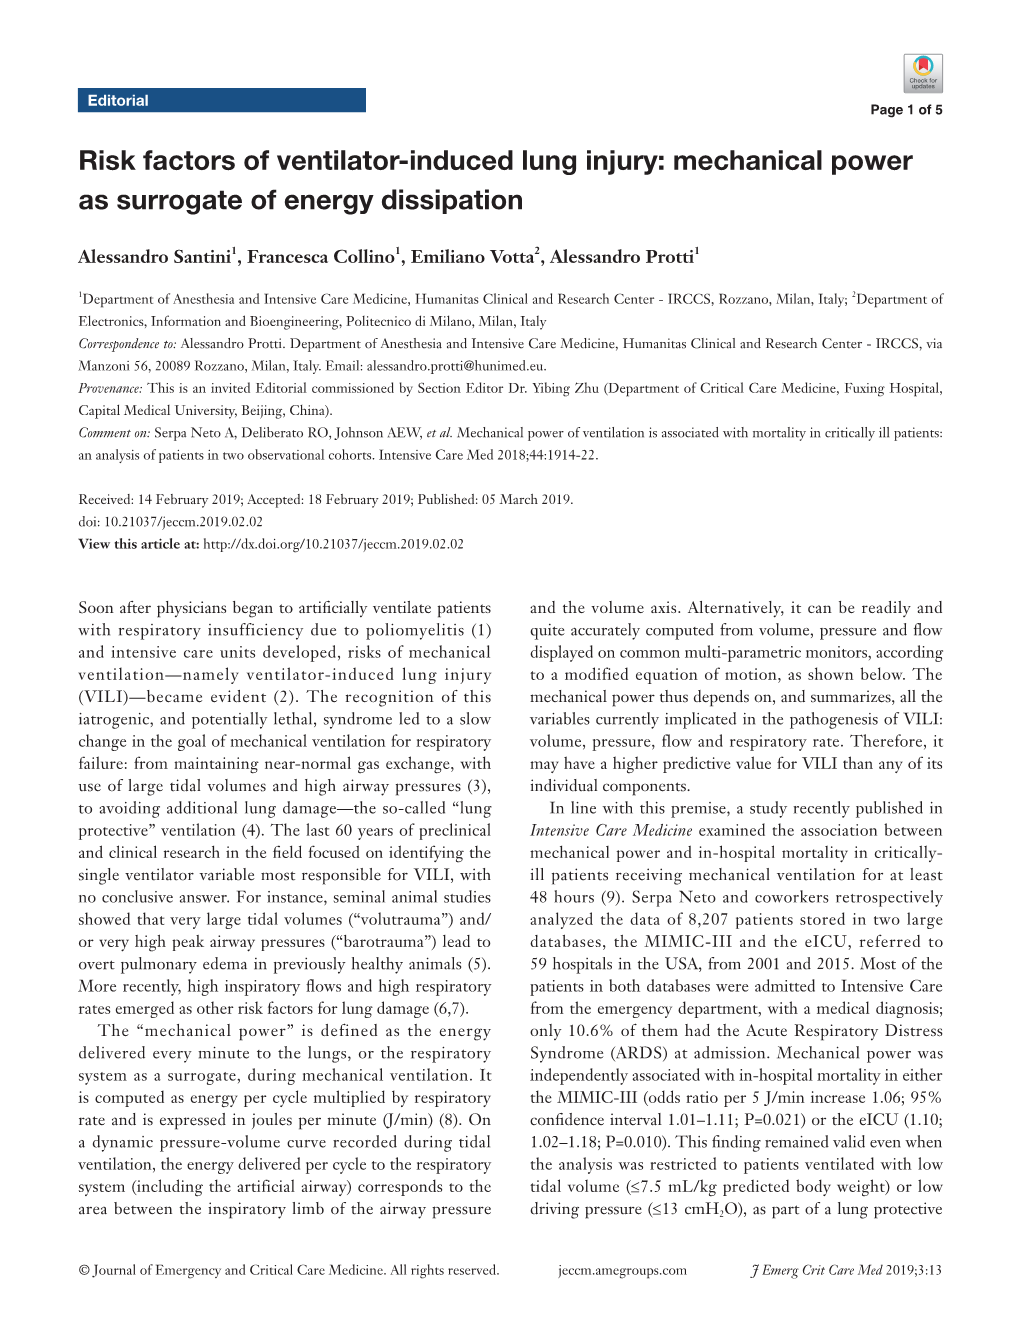 Mechanical Power As Surrogate of Energy Dissipation